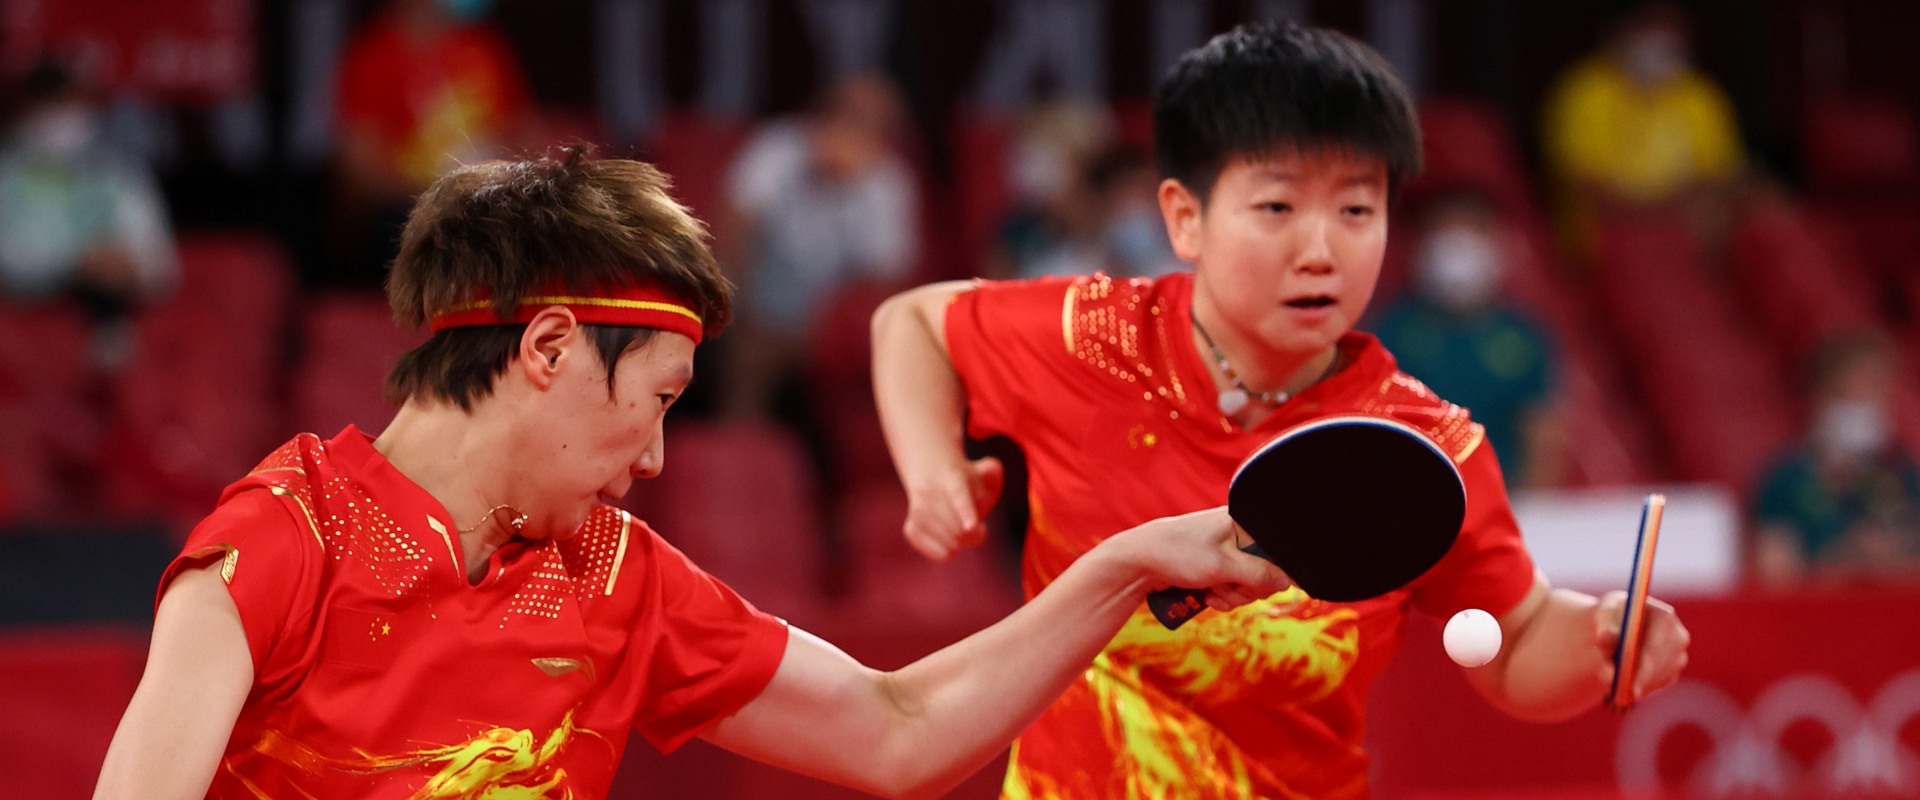 Table Tennis Tournaments: Rules and Regulations